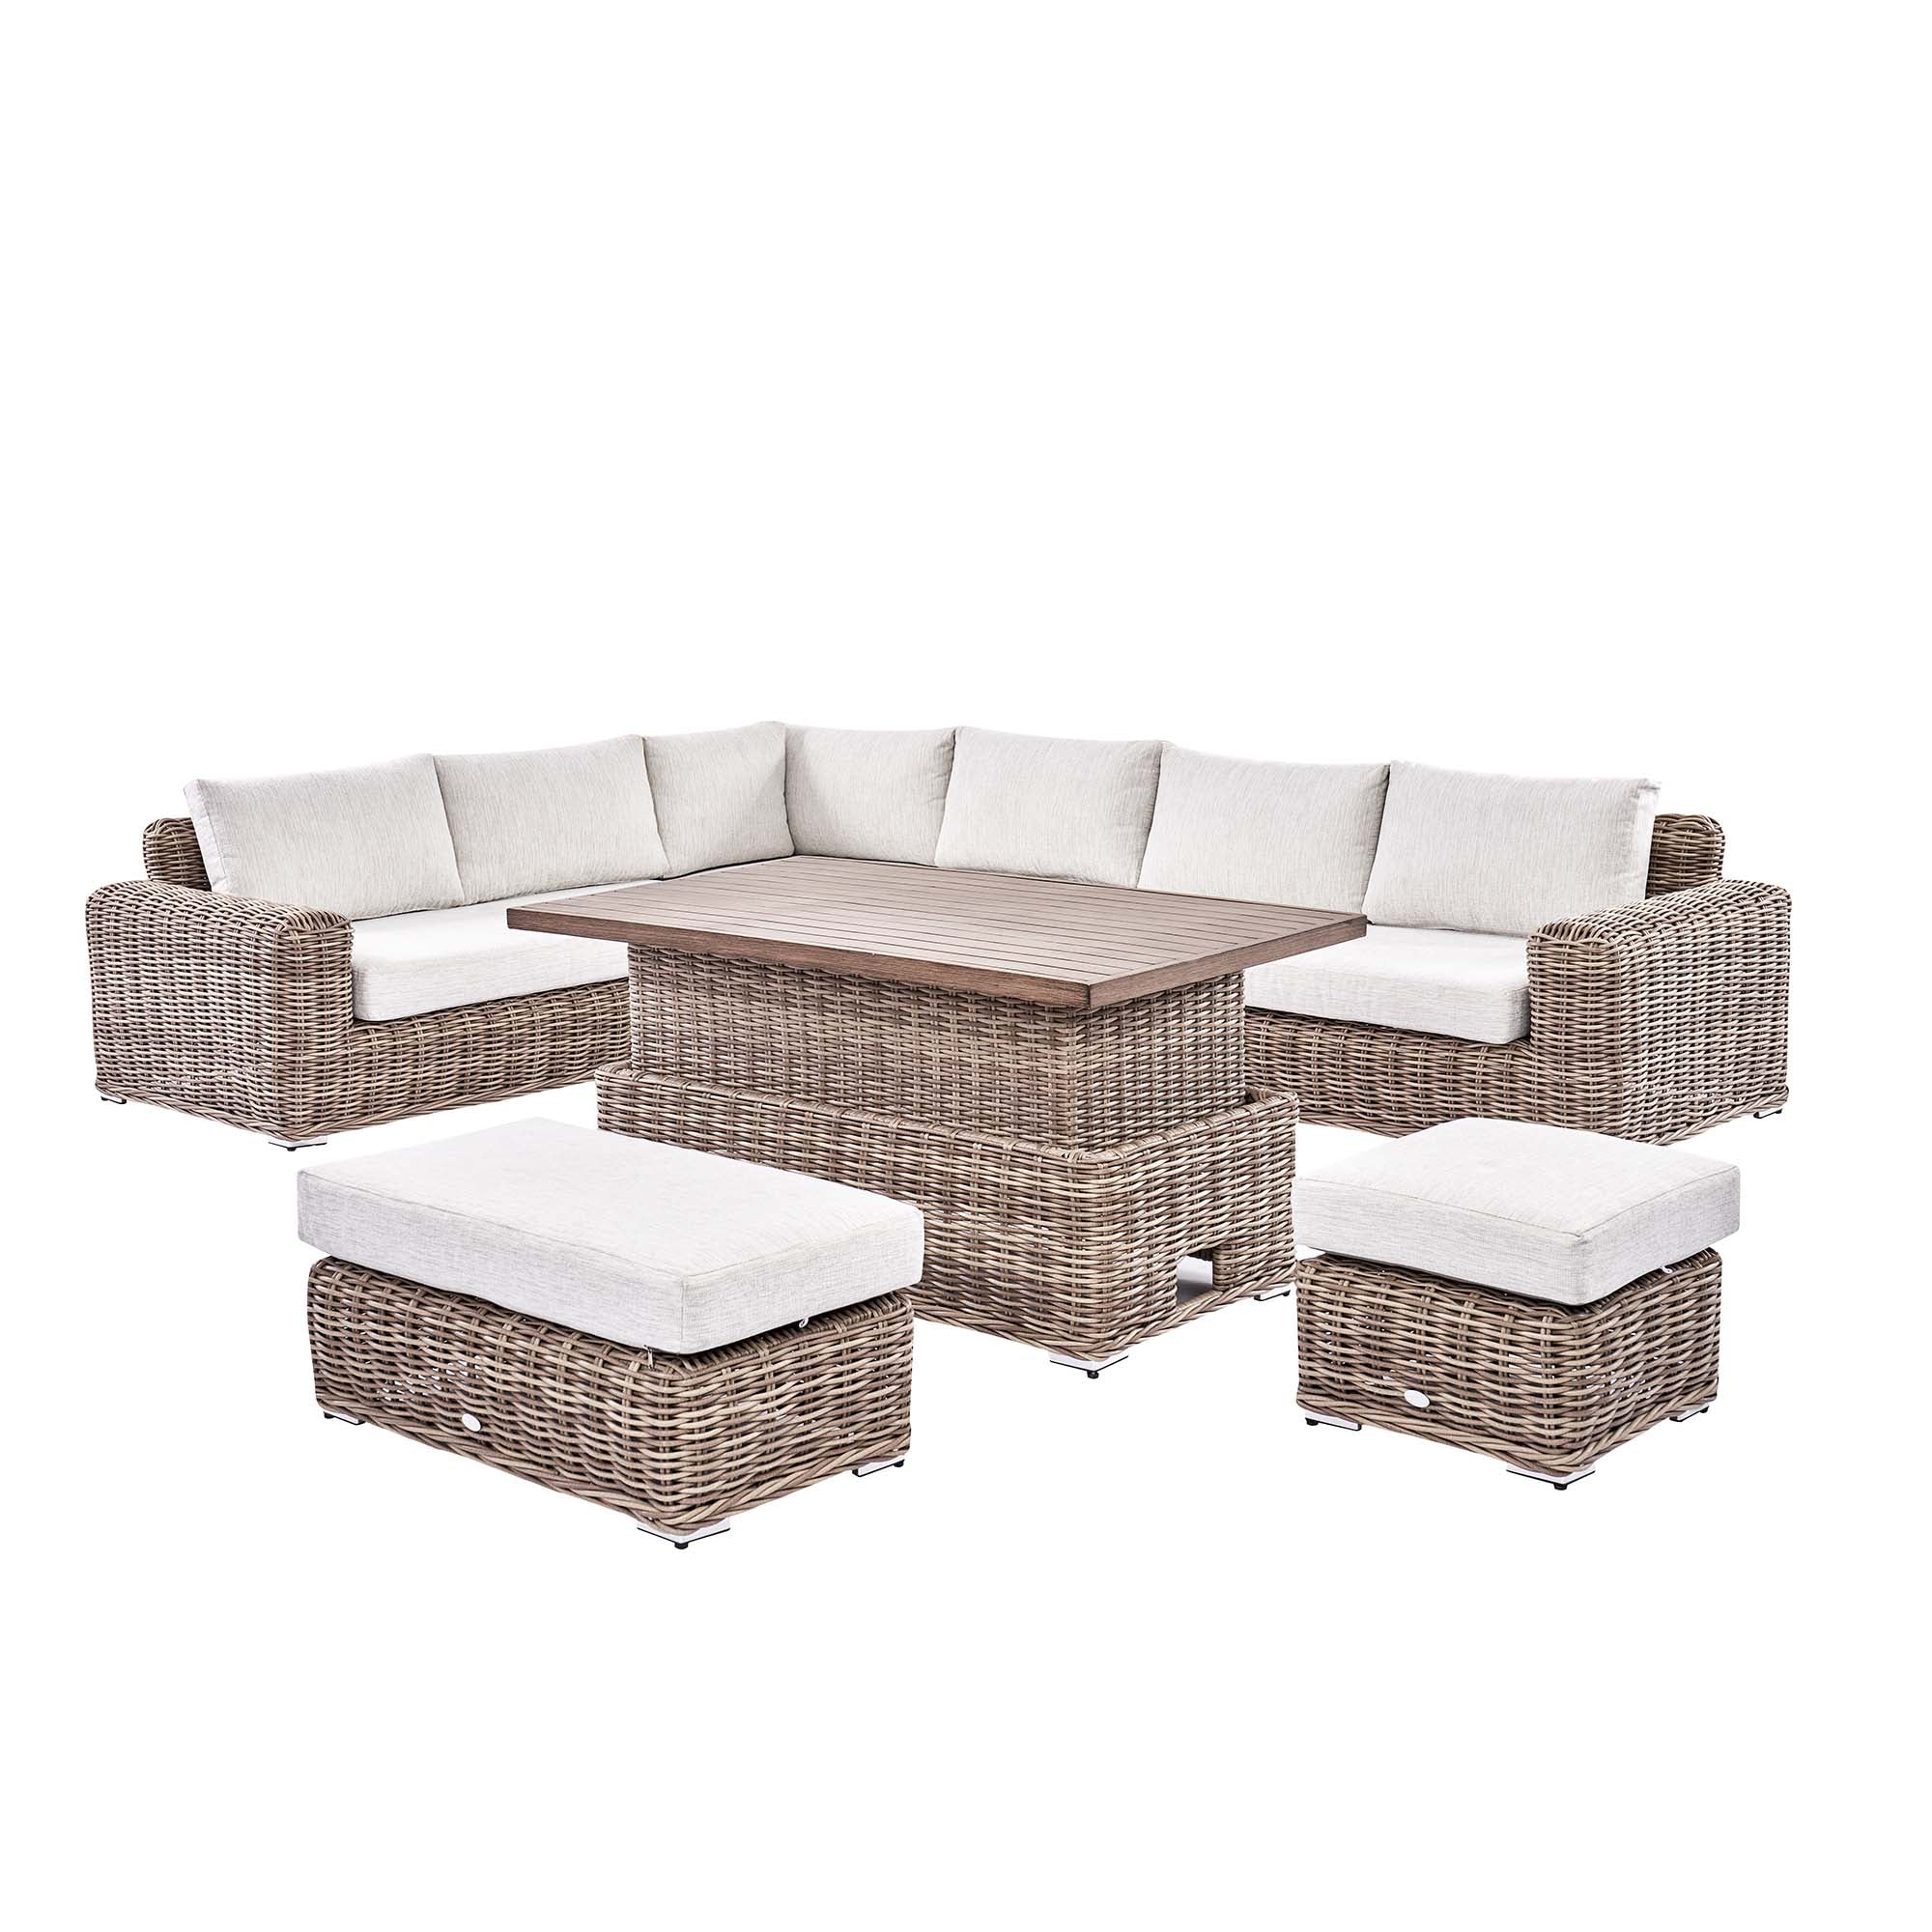 Bellagio Round Wicker Large Corner Casual Dining Set with Rising Table, Natural